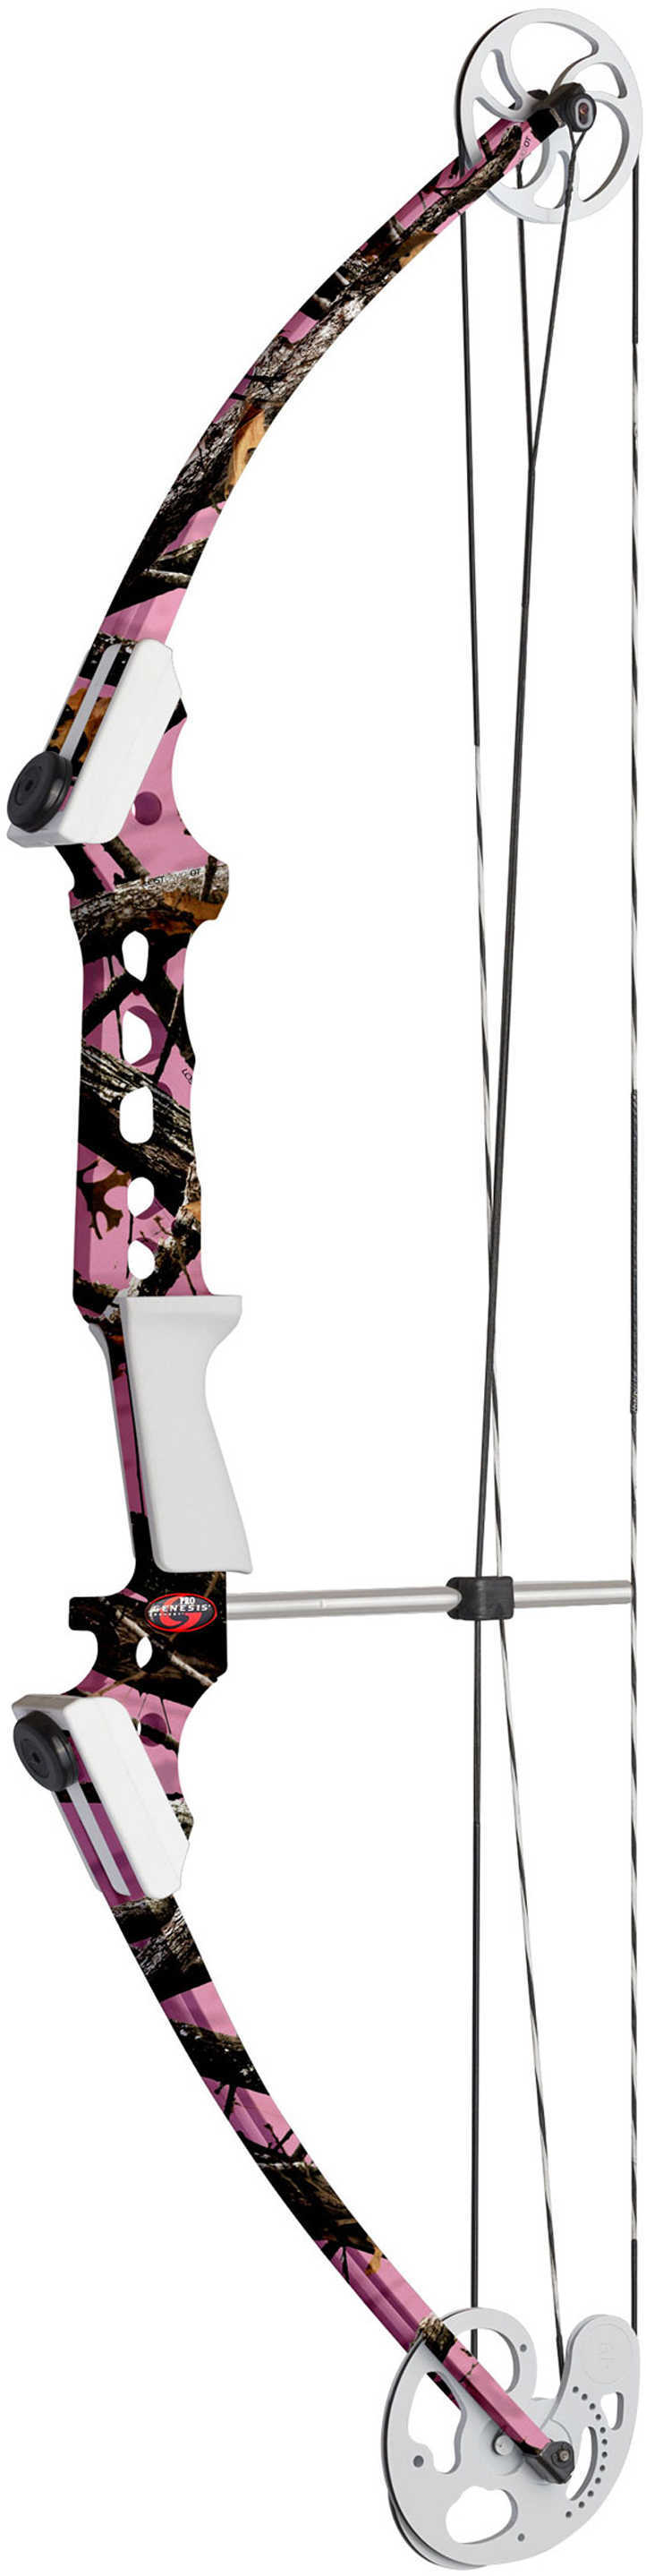 Genesis Pro Bow Right Handed, Pink Camo Md: 12276